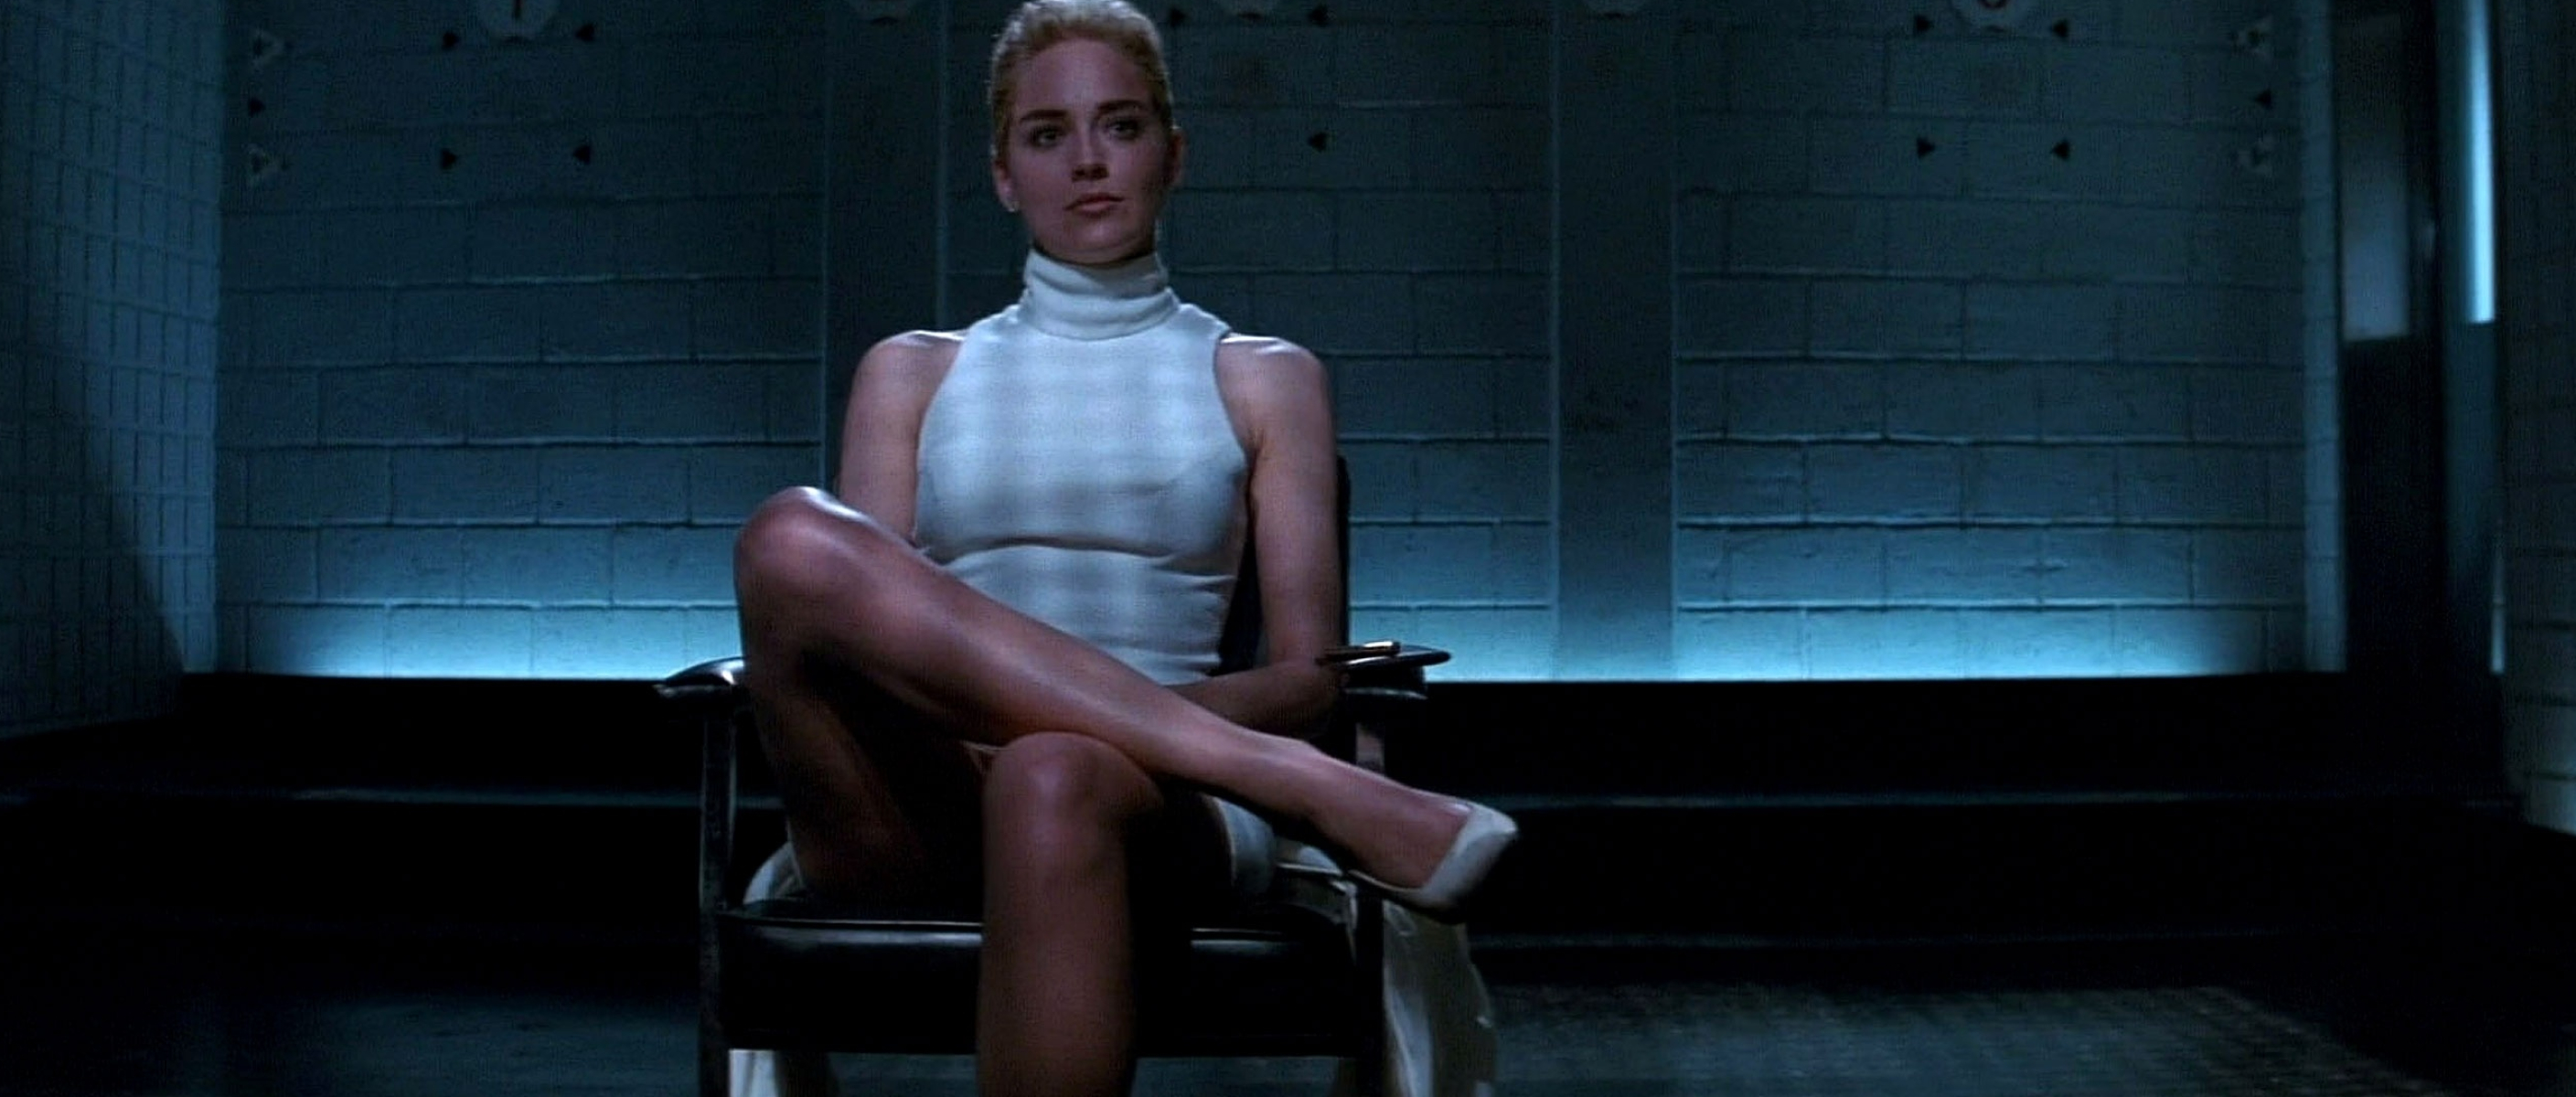 Basic Instinct, Continuation of the story, In-depth analysis, Media studies perspective, 2820x1200 Dual Screen Desktop